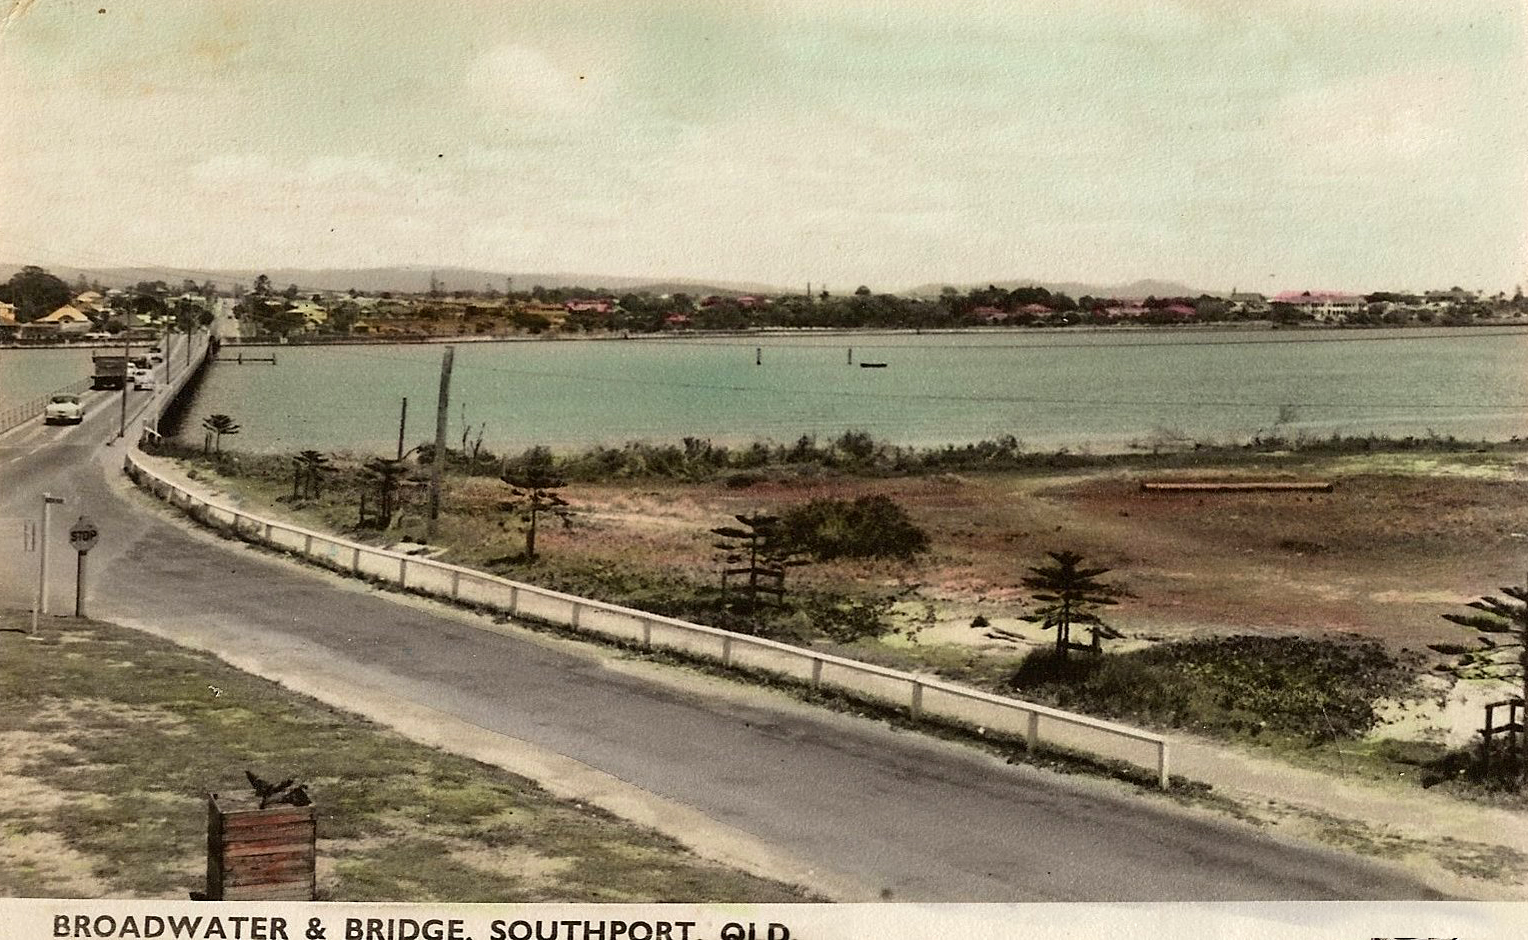 a vintage pograph of a lake and road near beach